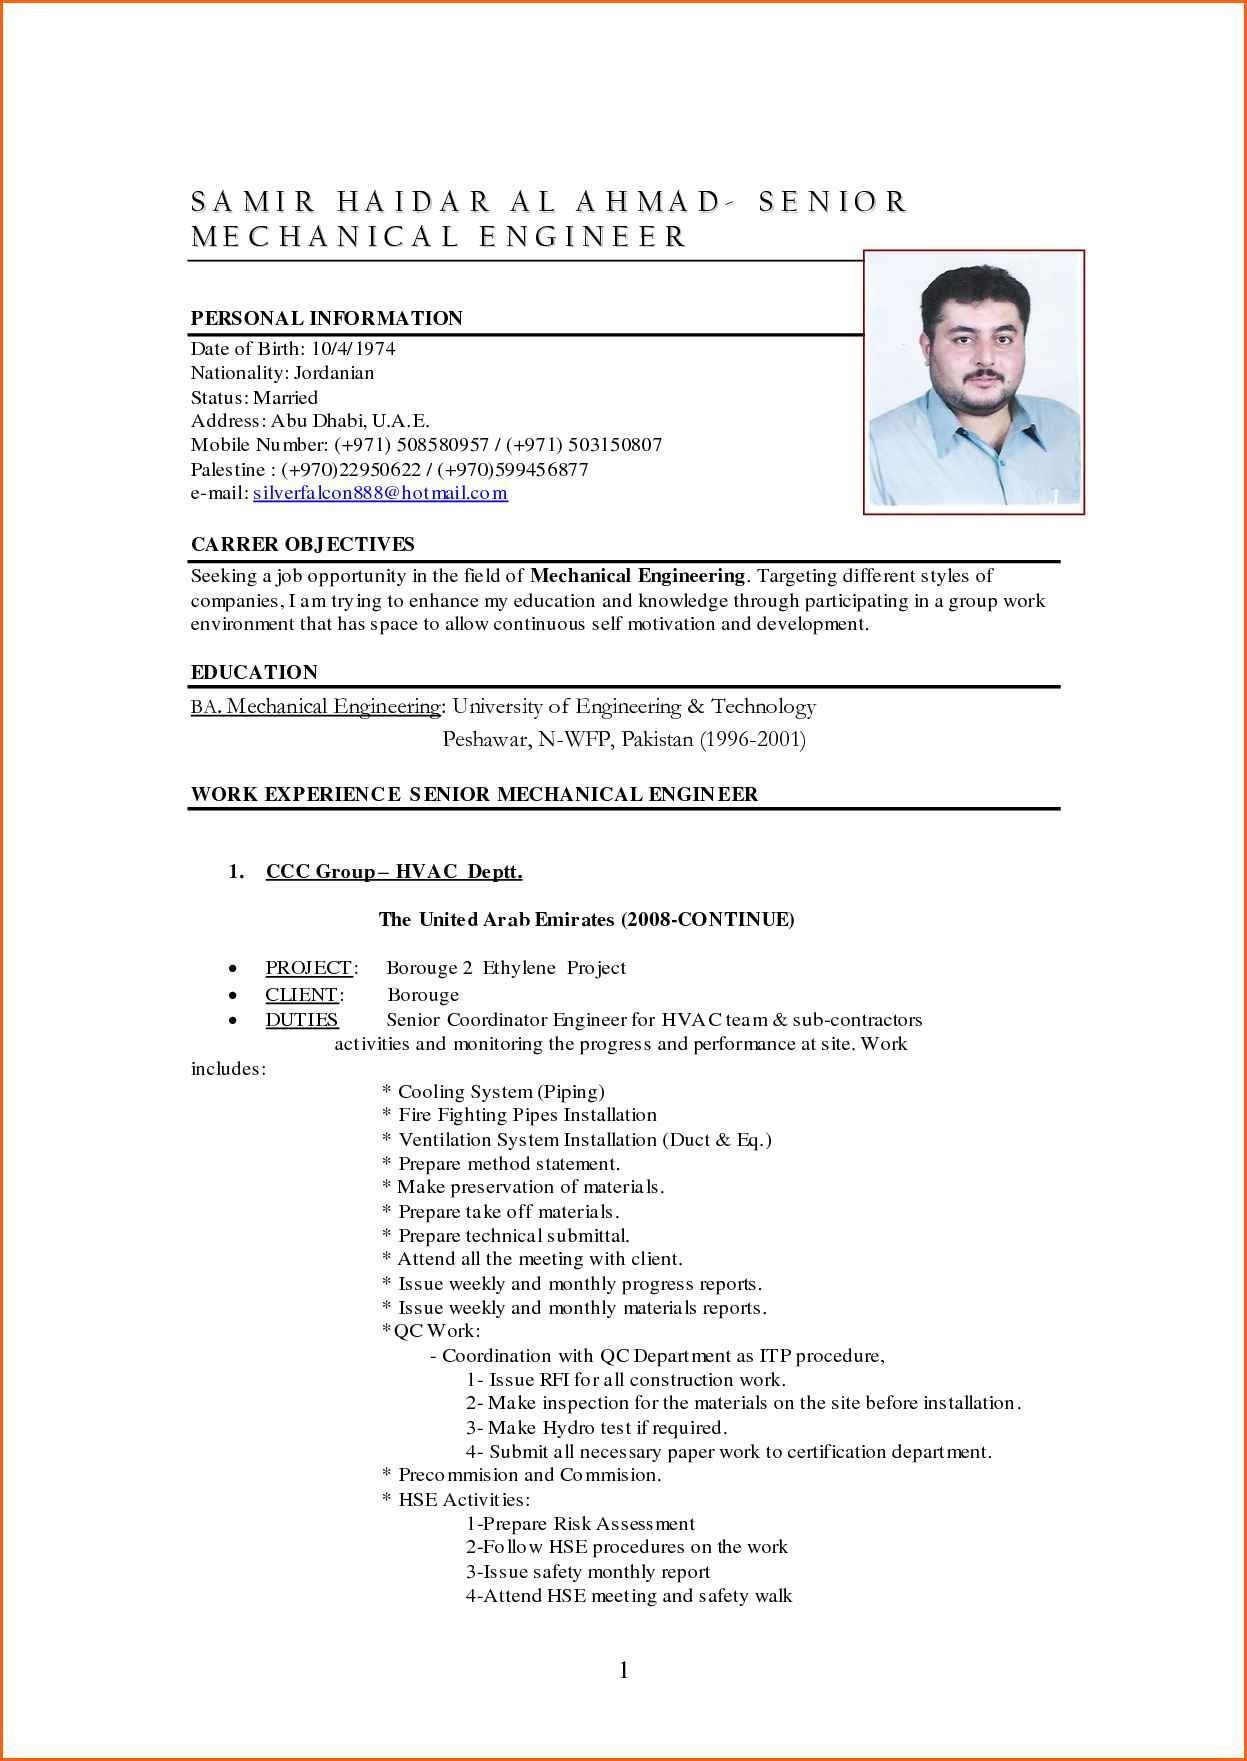 Diploma Mechanical Engineering Experience Resume Samples Mechanical Engineer Resume Sample Modern Resume format for Diploma …